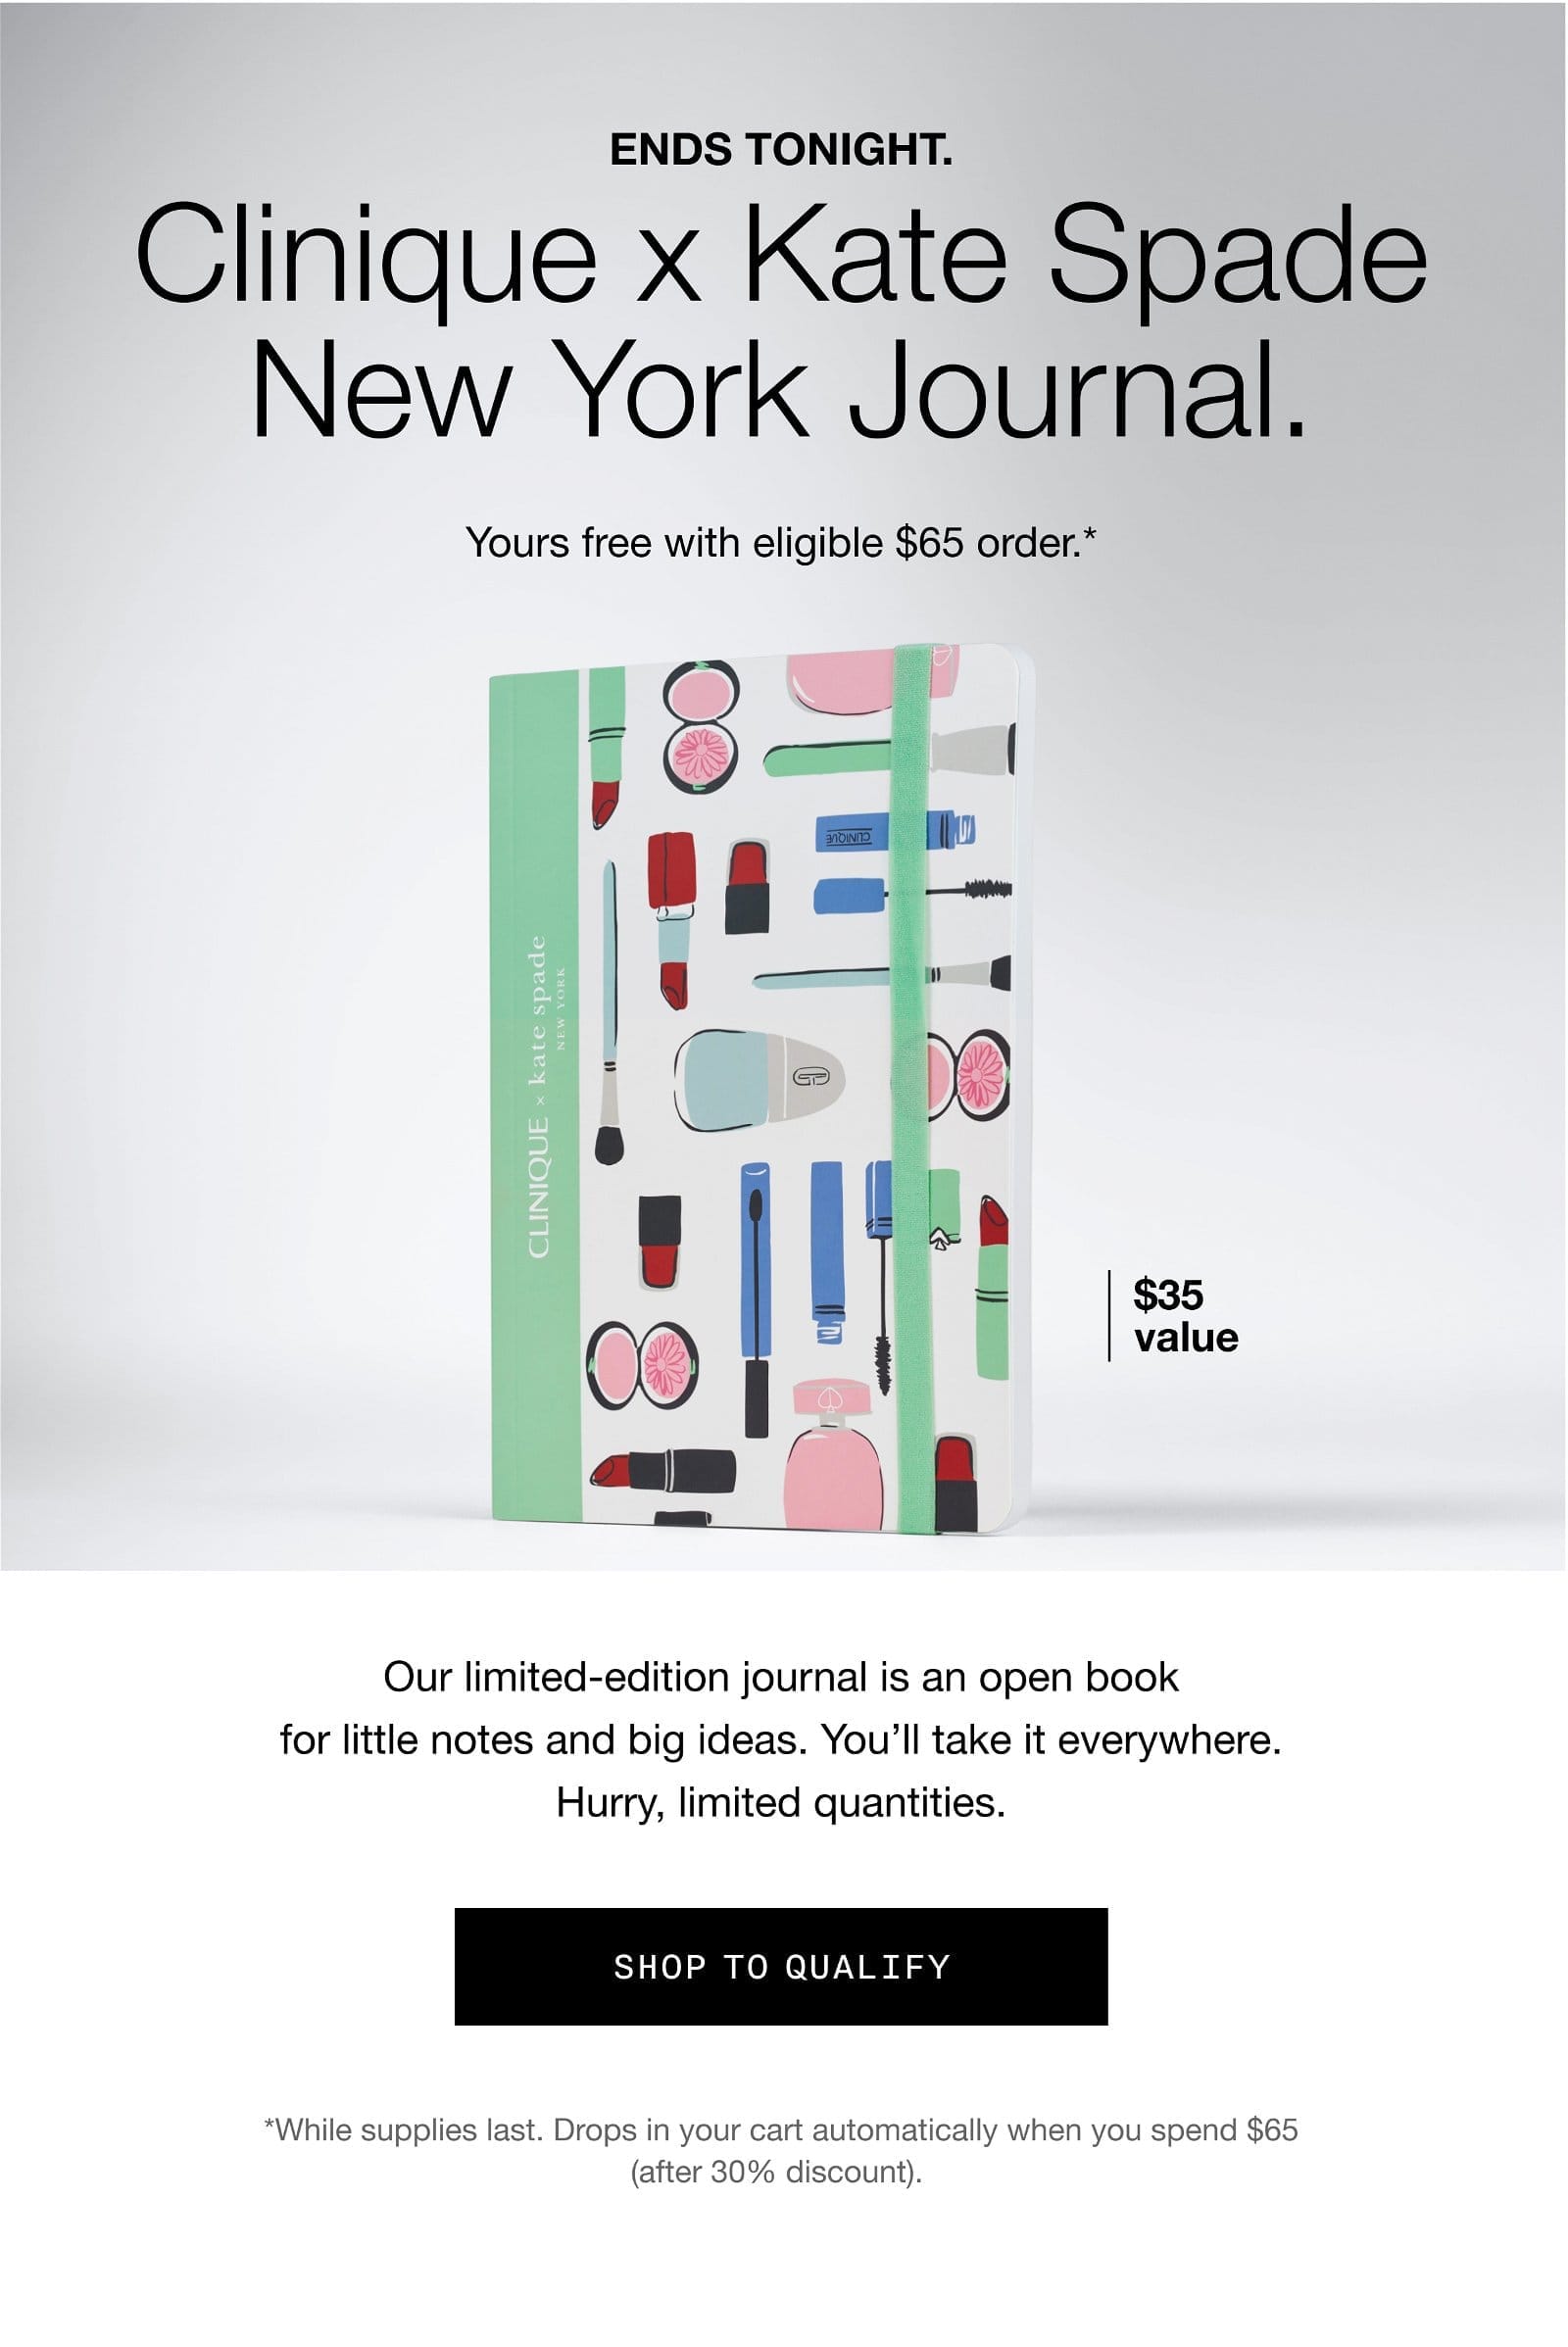 ENDS TONIGHT Clinique X Kate Spade New York Journal. Yours free with eligible \\$65 order.* | \\$35 value | Our limited-edition journal is an open book for little notes and big ideas. You'll take it everywhere. Hurry, limited quantities. | SHOP TO QUALIFY | *While supplies last. Drops in your cart automatically when you spend \\$65 (after 30% discount).